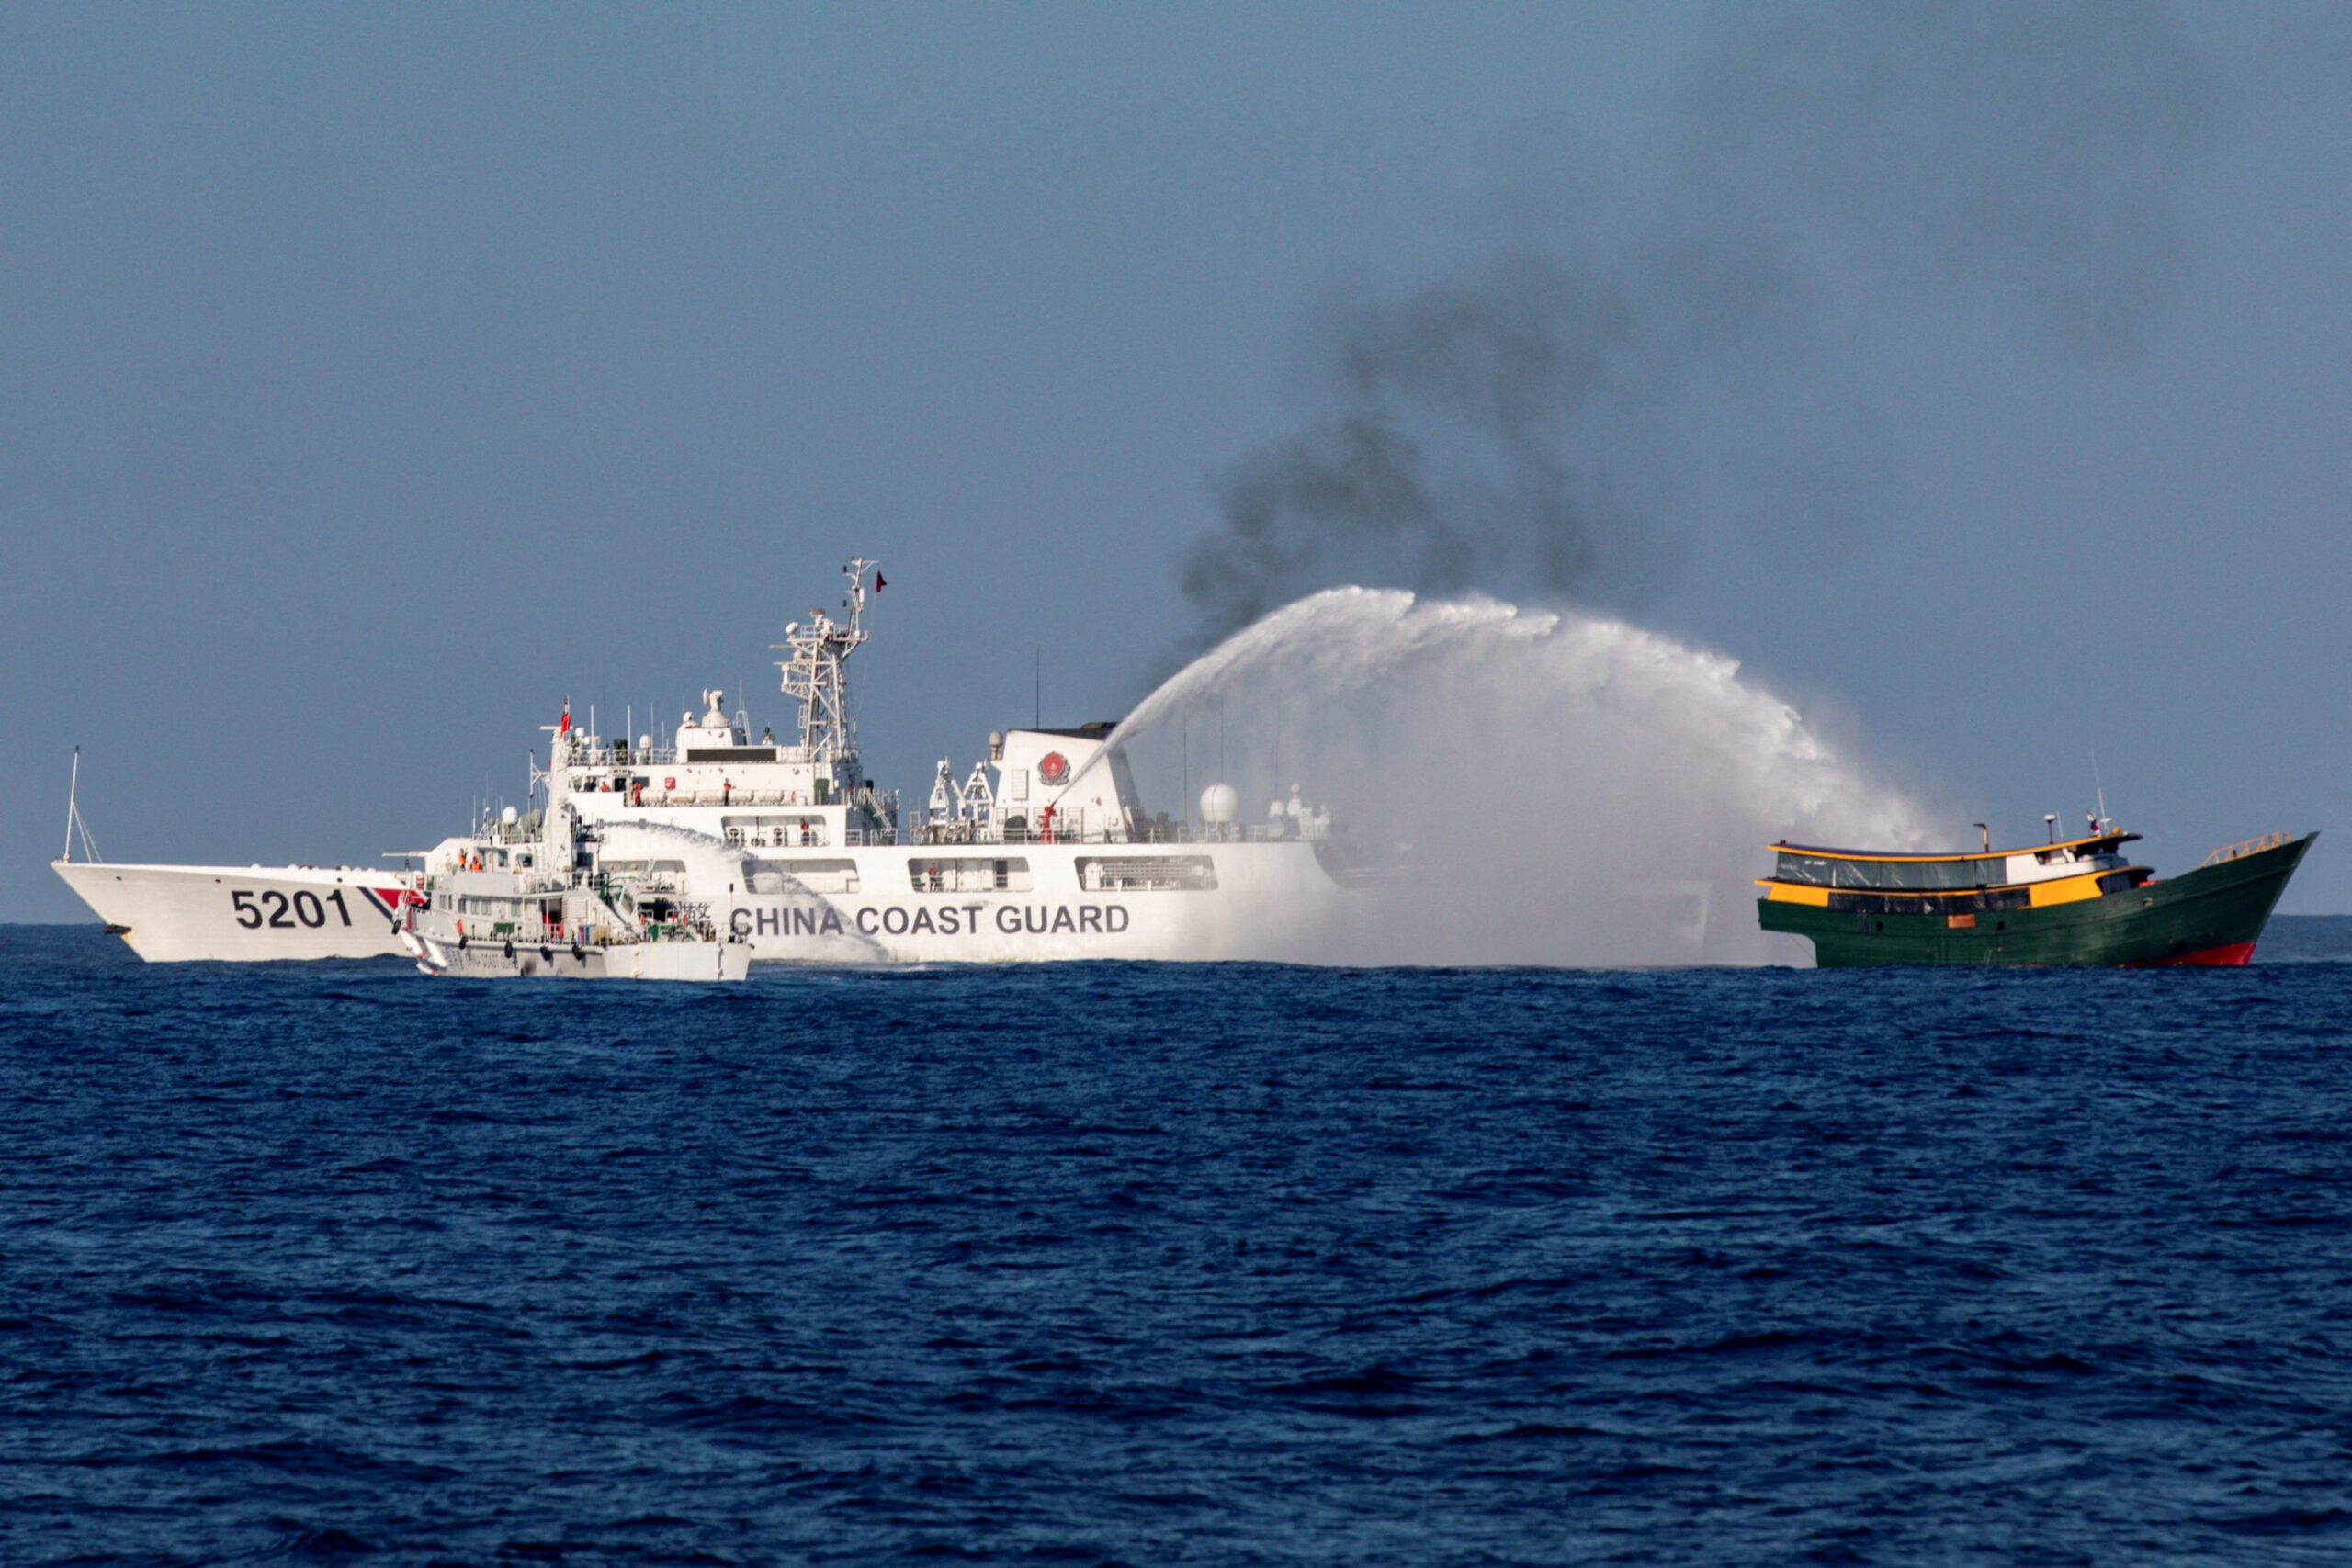 Chinese Coast Guard vessels fire water cannons towards a Philippine resupply vessel Unaizah May 4 on its way to a resupply mission at Second Thomas Shoal in the South China Sea. REUTERS/Adrian Portugal TPX IMAGES OF THE DAY